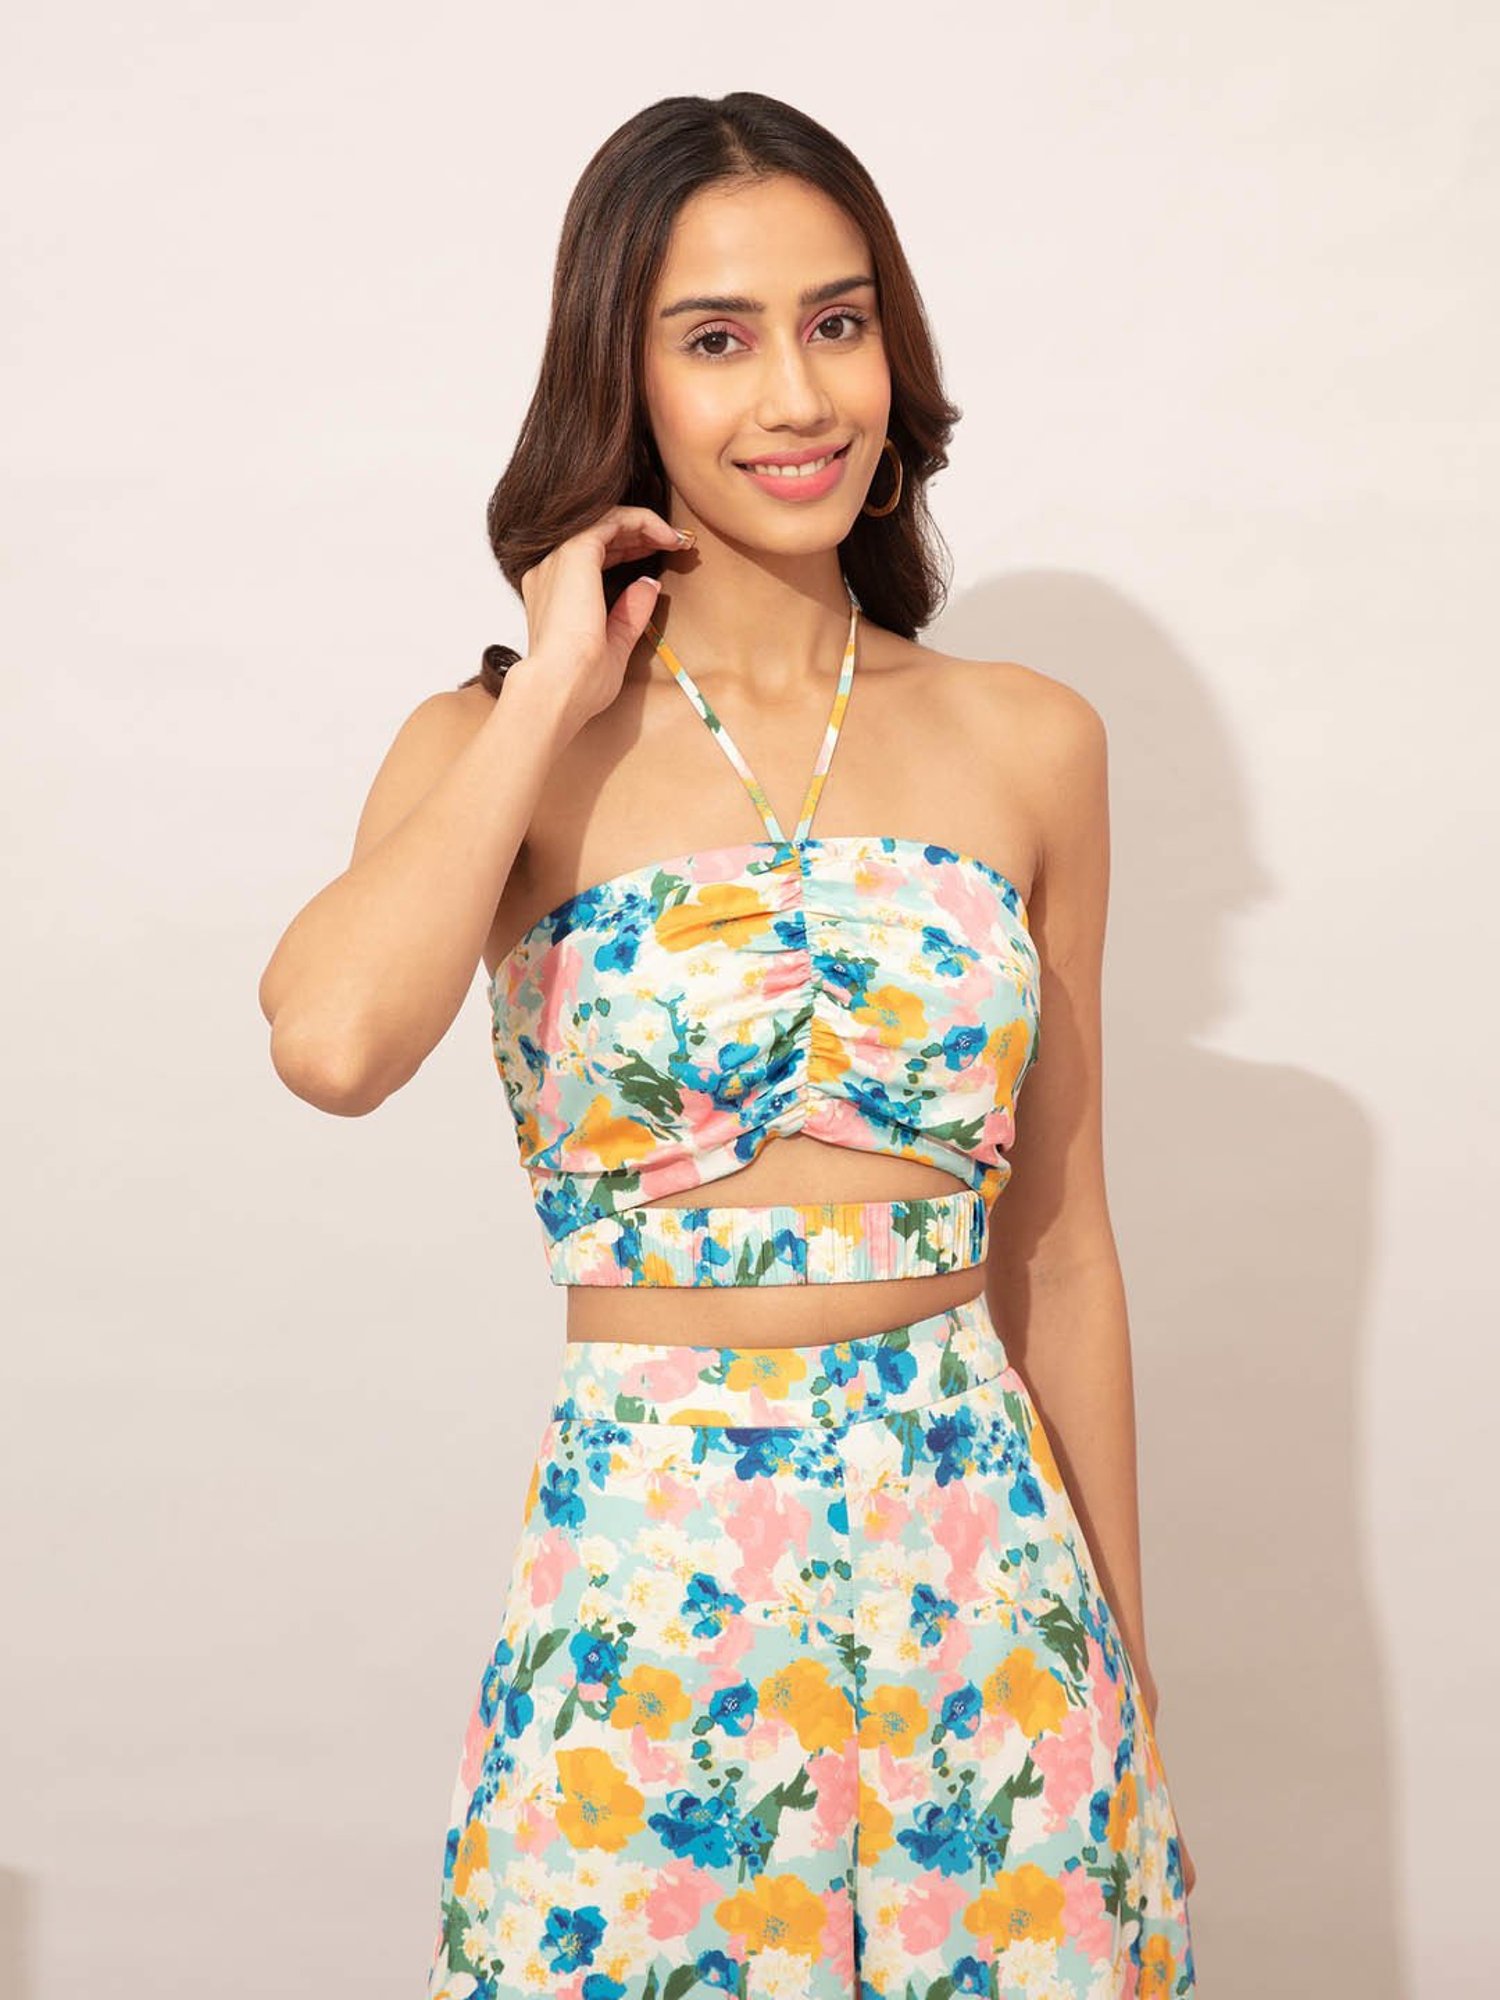 Twenty Dresses by Nykaa Fashion White Halter Neck Crop Top (L) At Nykaa Fashion - Your Online Shopping Store